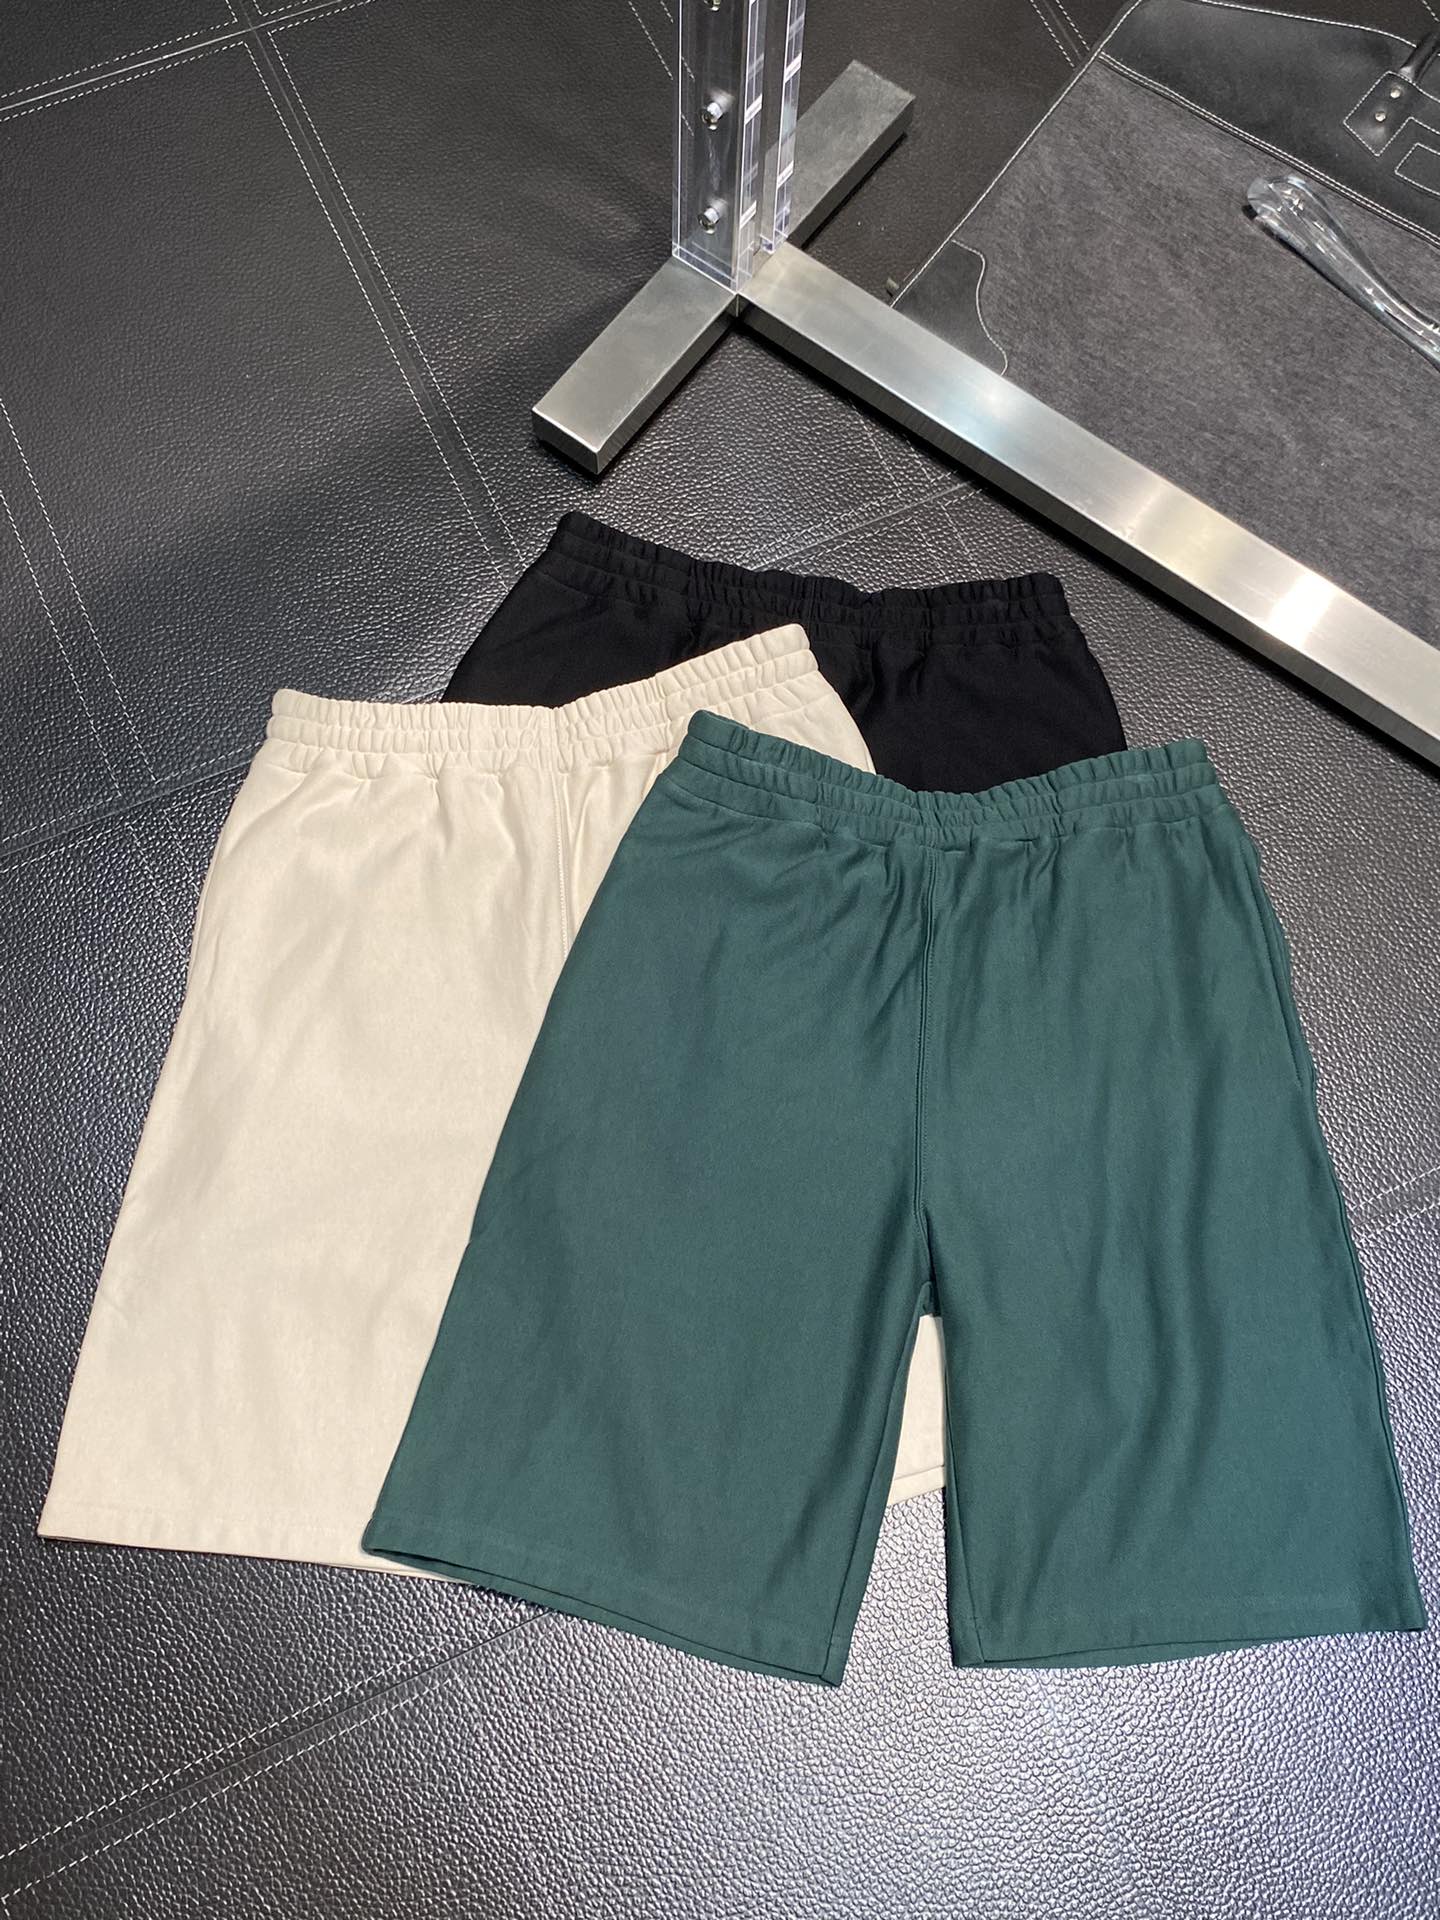 Burberry Clothing Shorts Casual